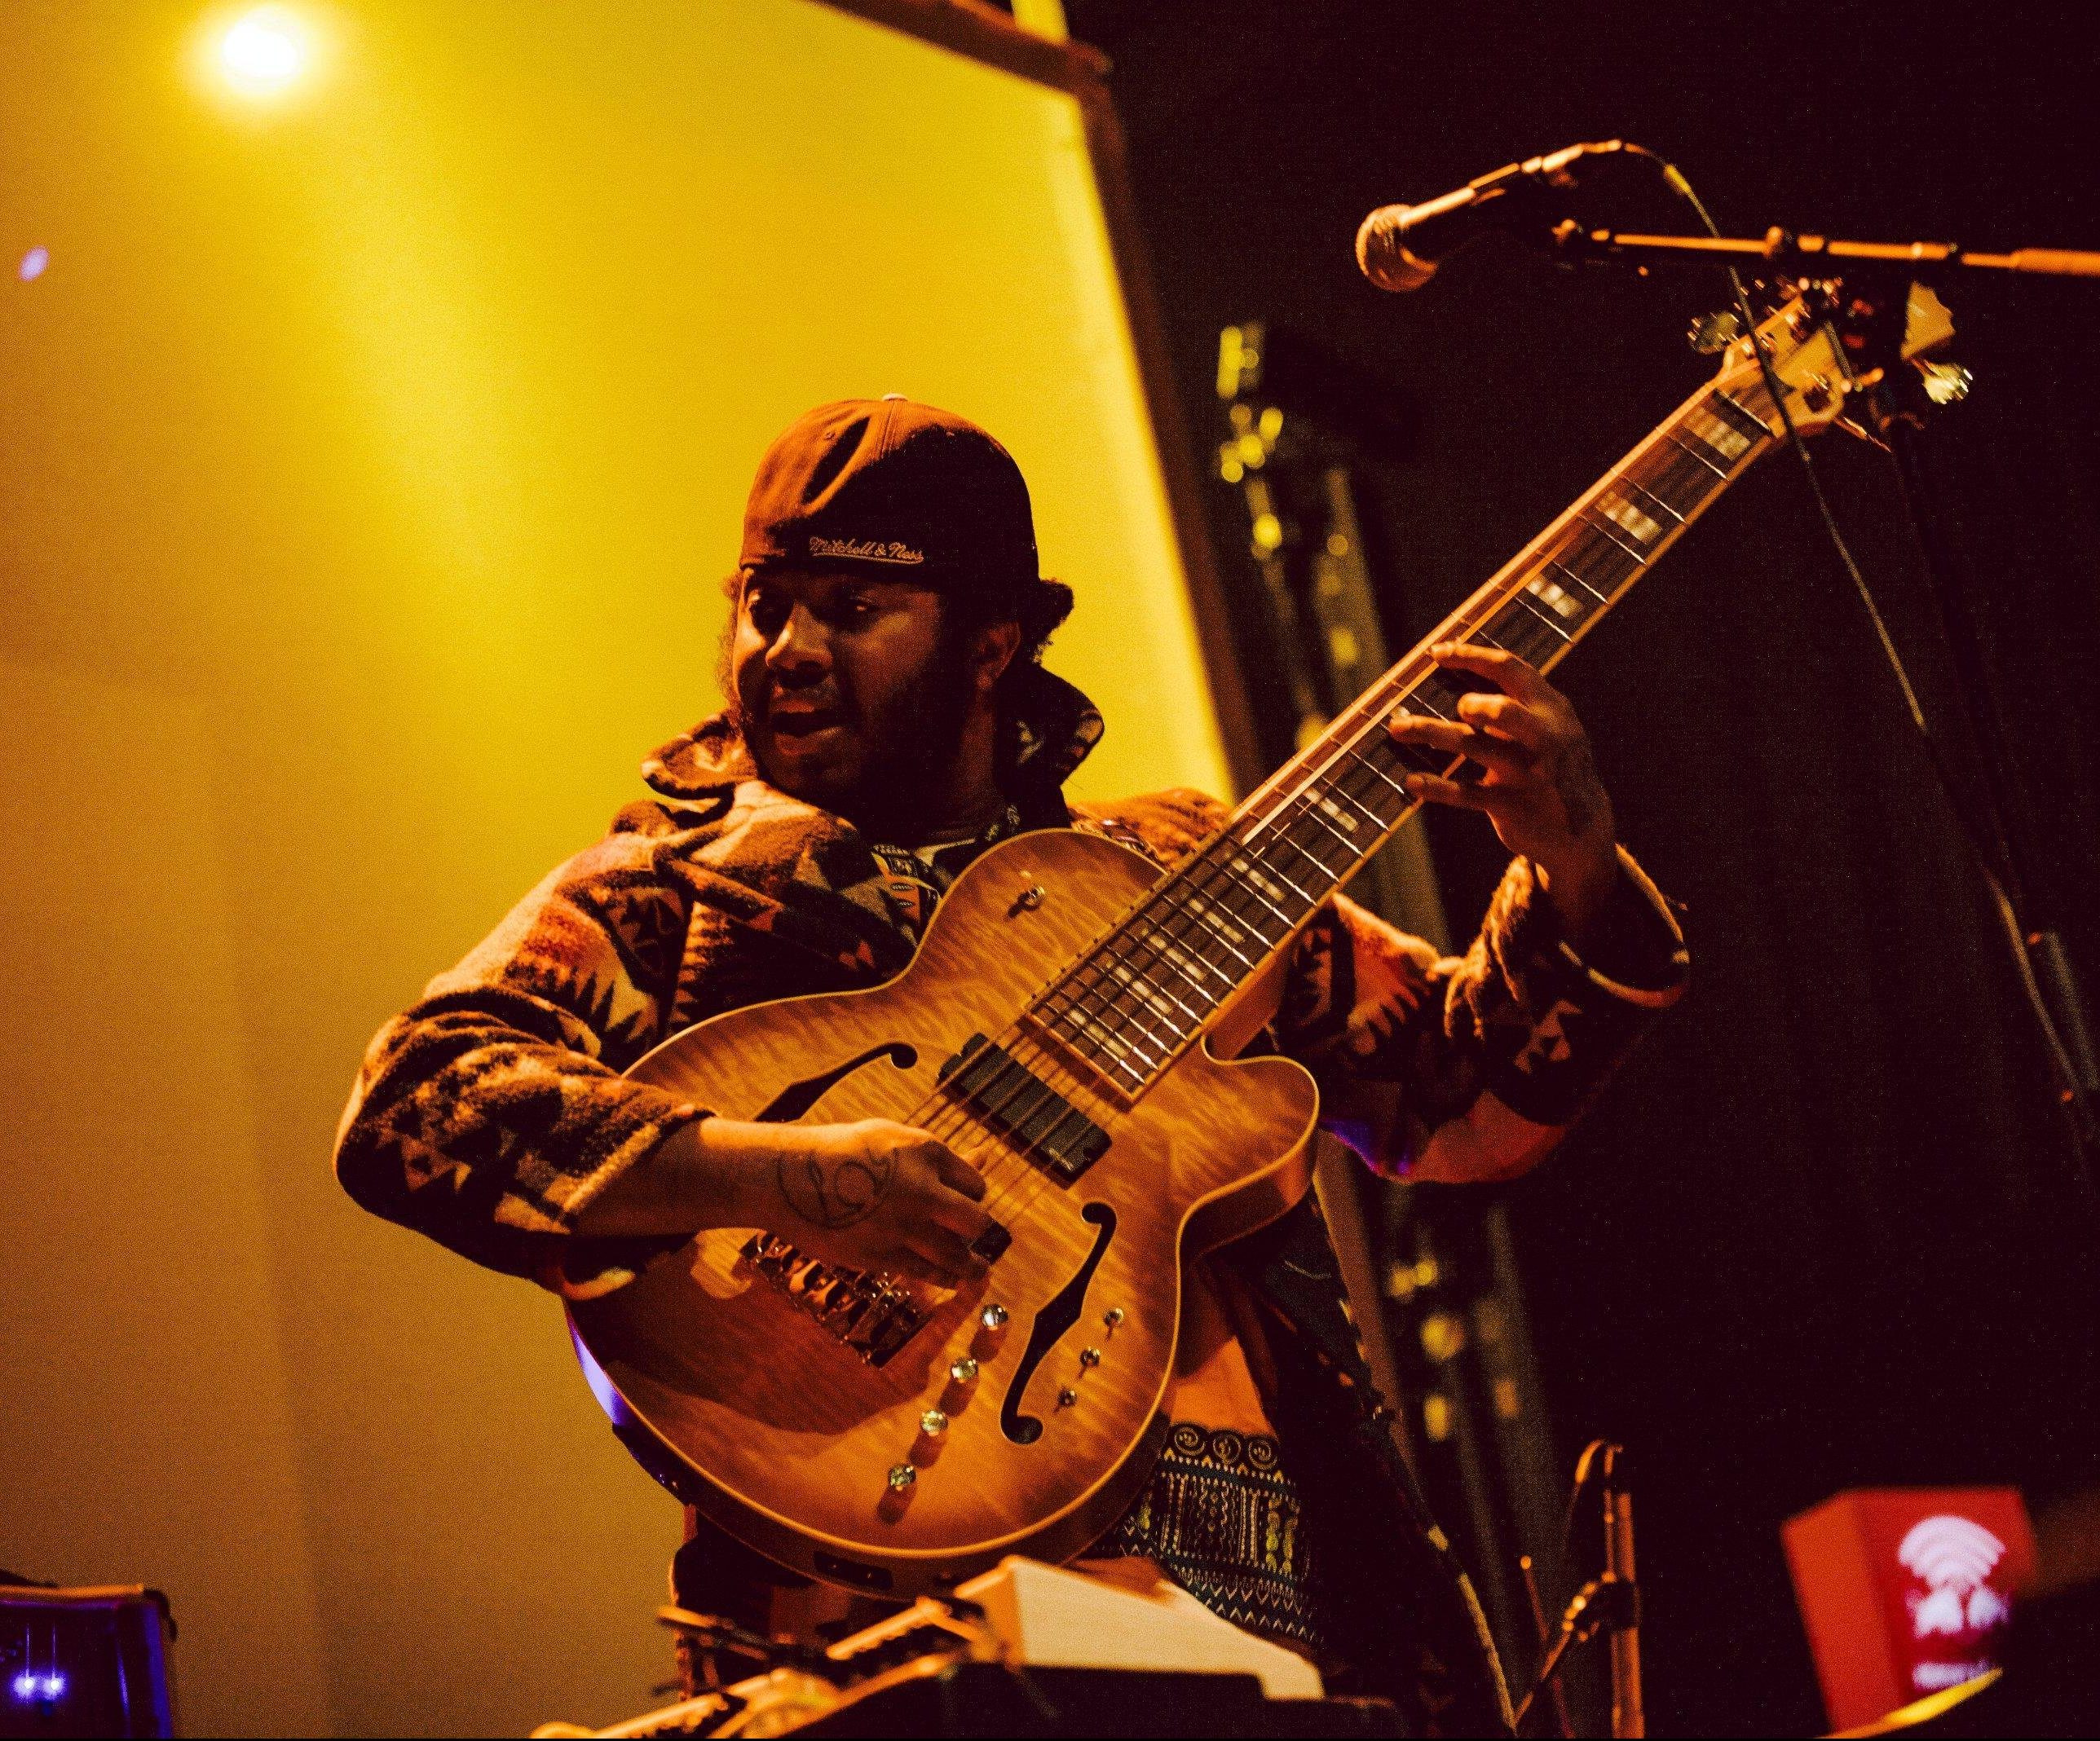 Get Your Groove On! Musical Chameleon Thundercat is Coming to KL